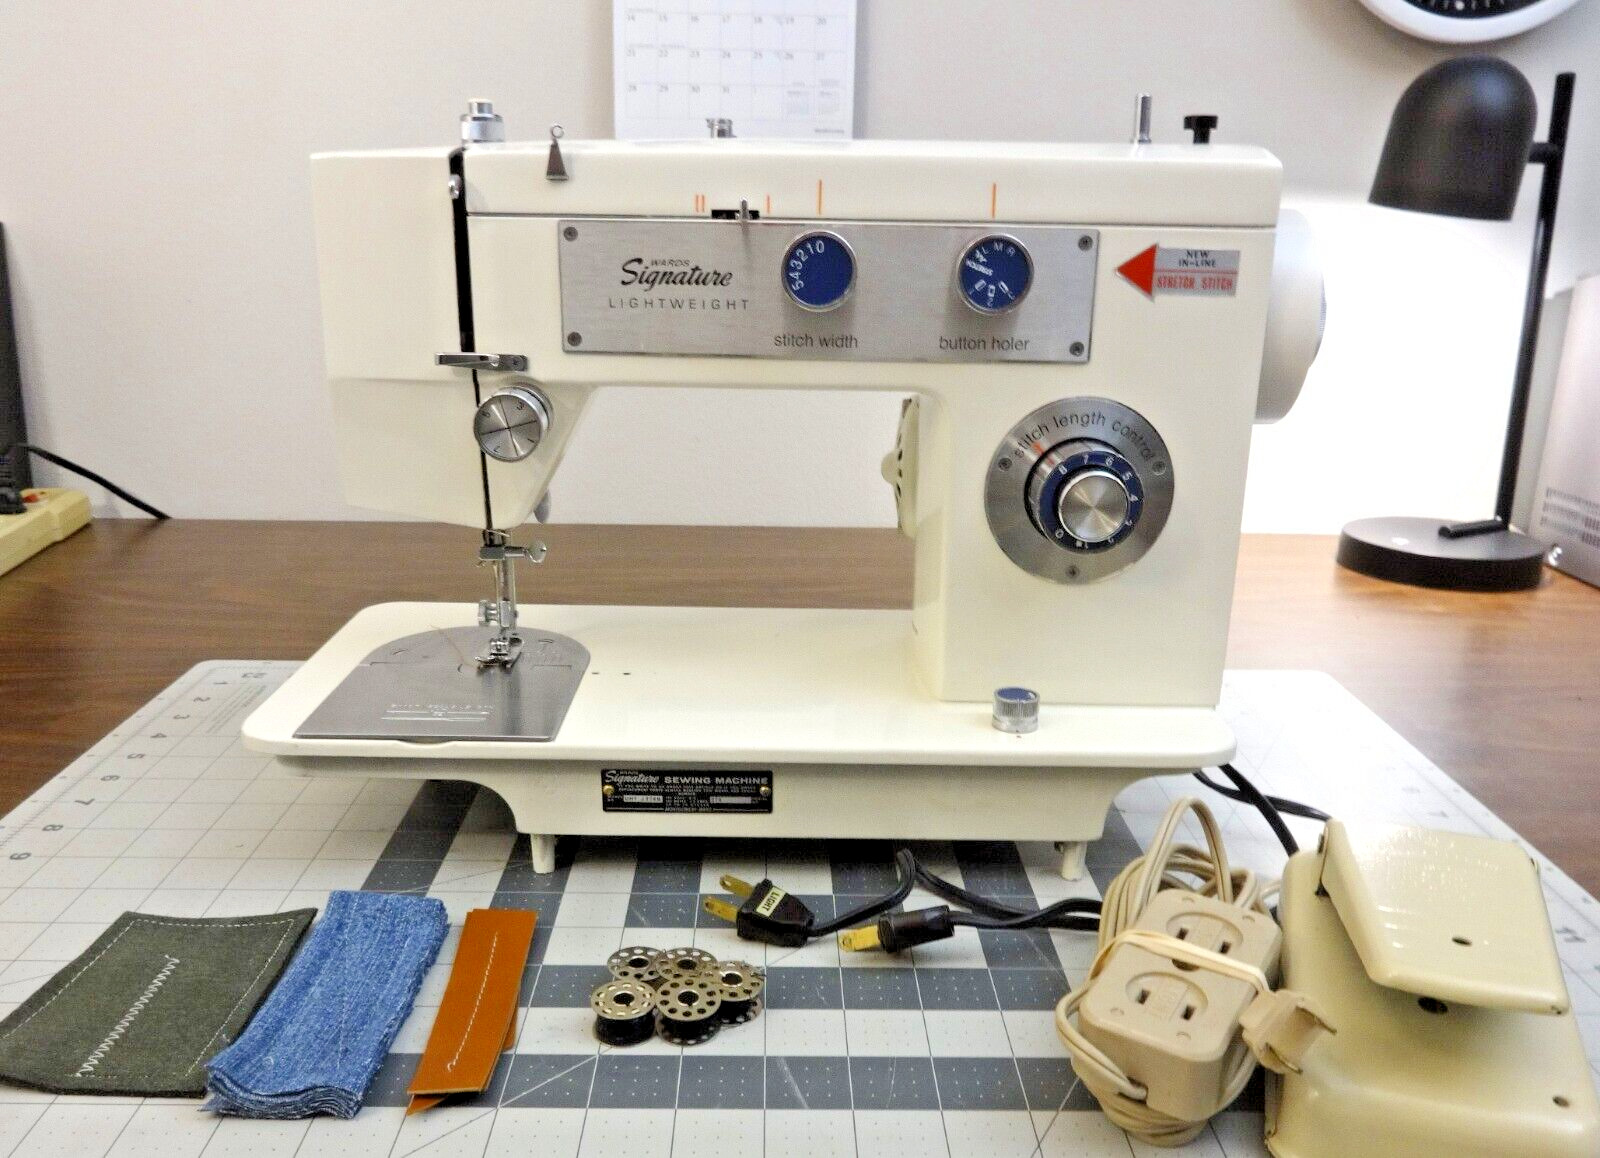 WARDS SIGNATURE Zigzag Sewing Machine 1.3 Amp Motor - Canvas Leather - SERVICED